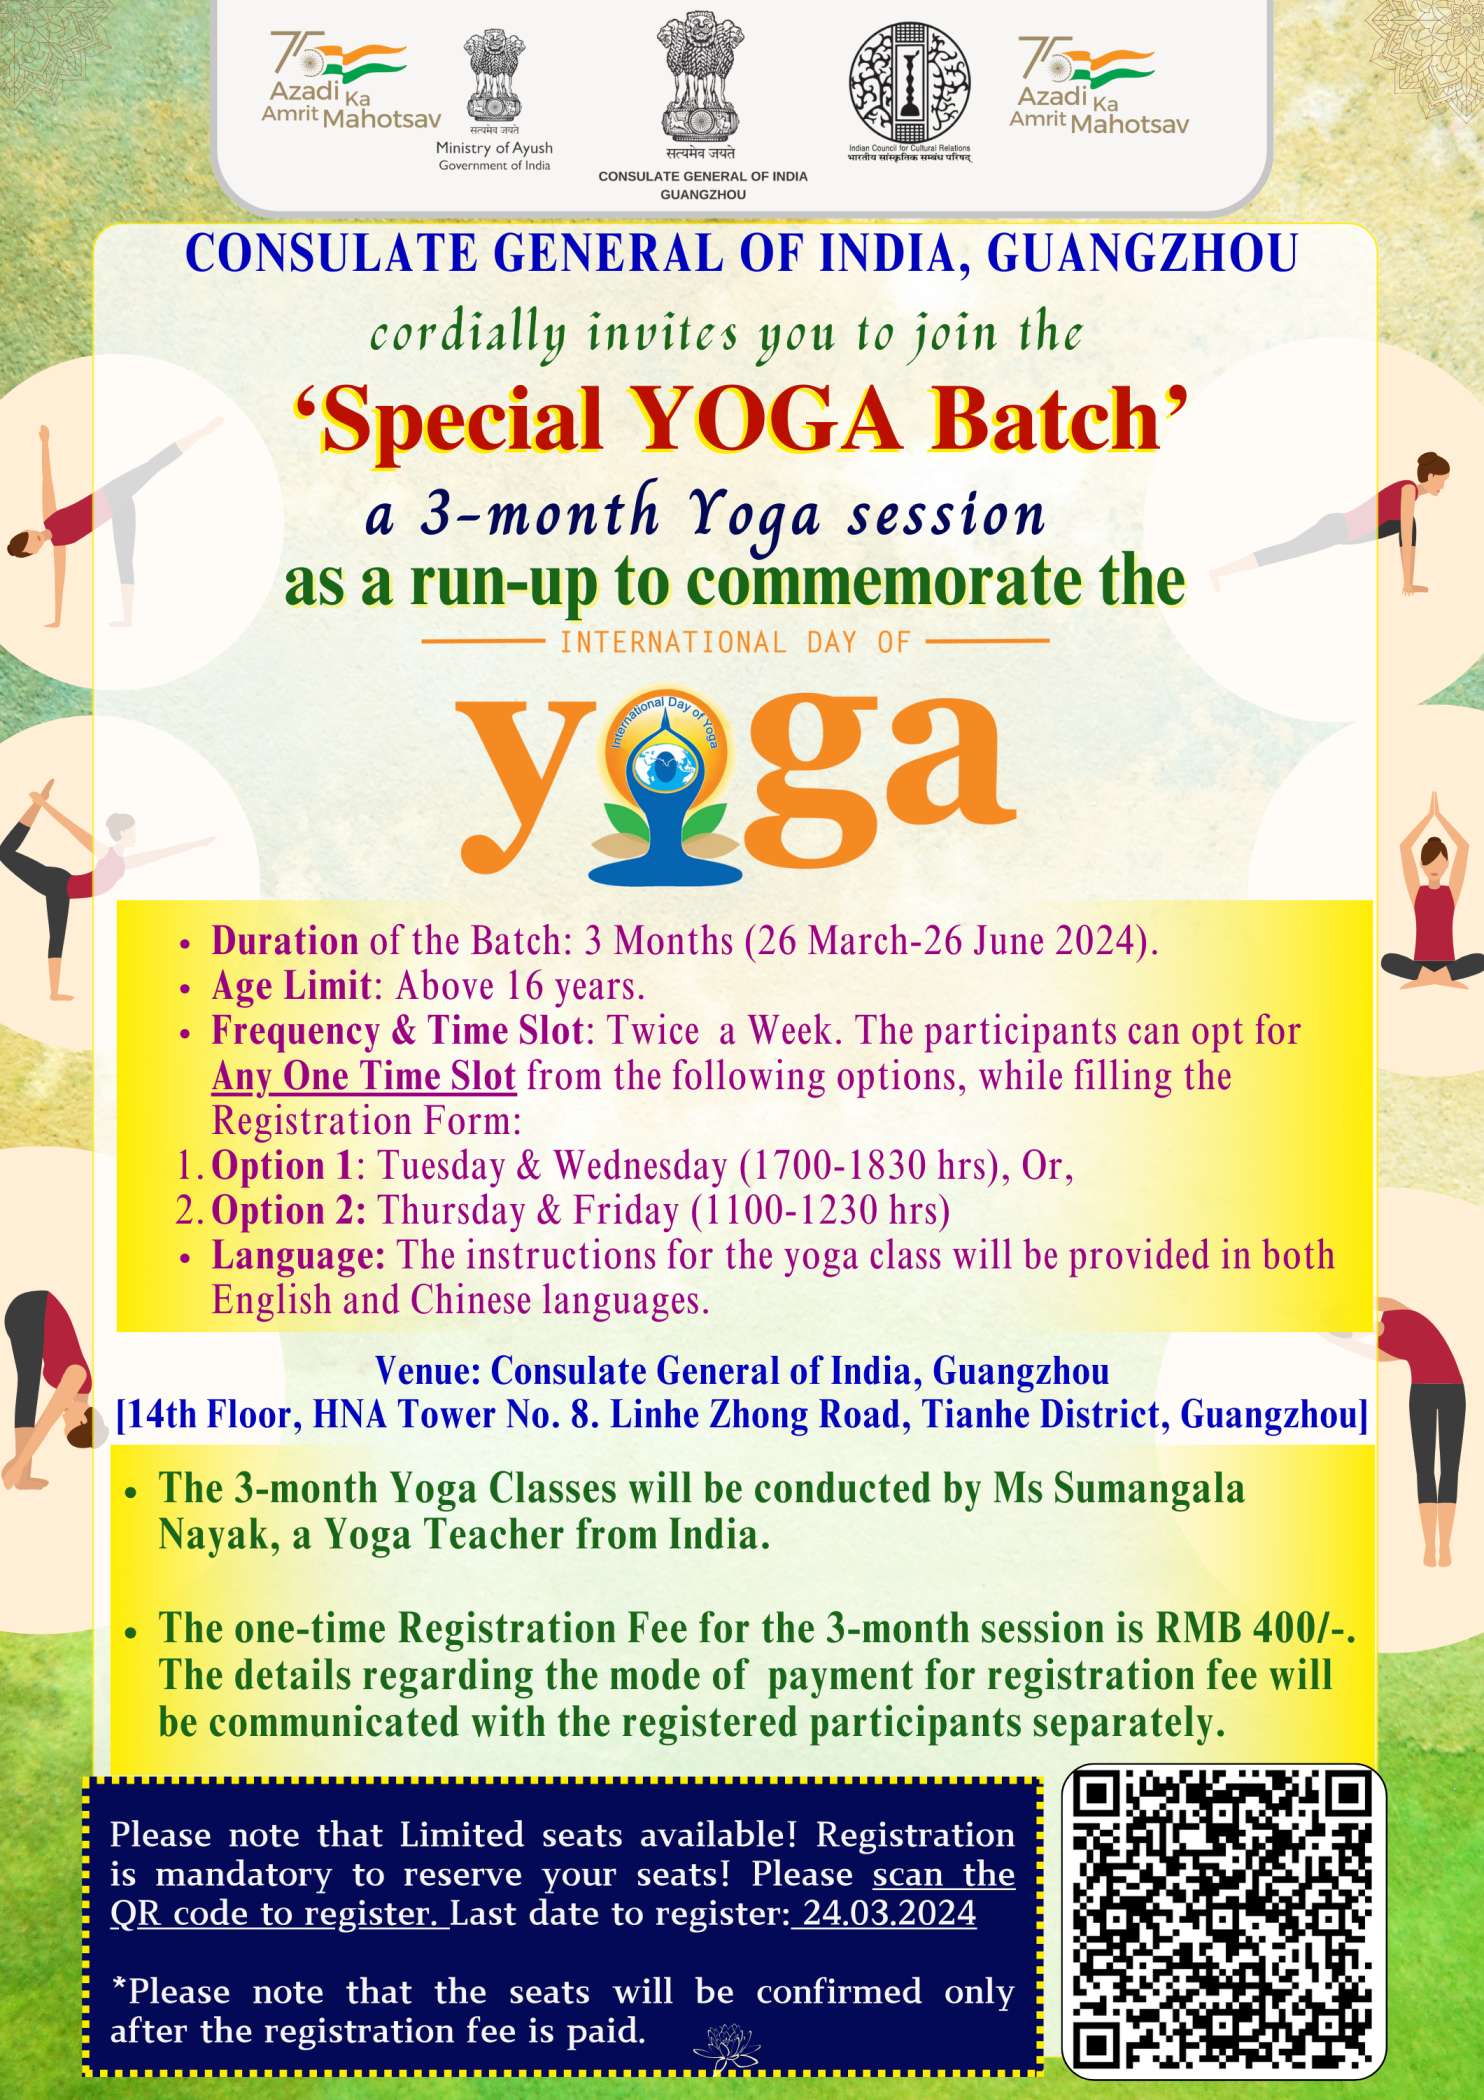 Invitation to attend the ‘Special Yoga Batch’ as run-up to the International Day of Yoga, starting from 26 March 2024 (Tuesday)